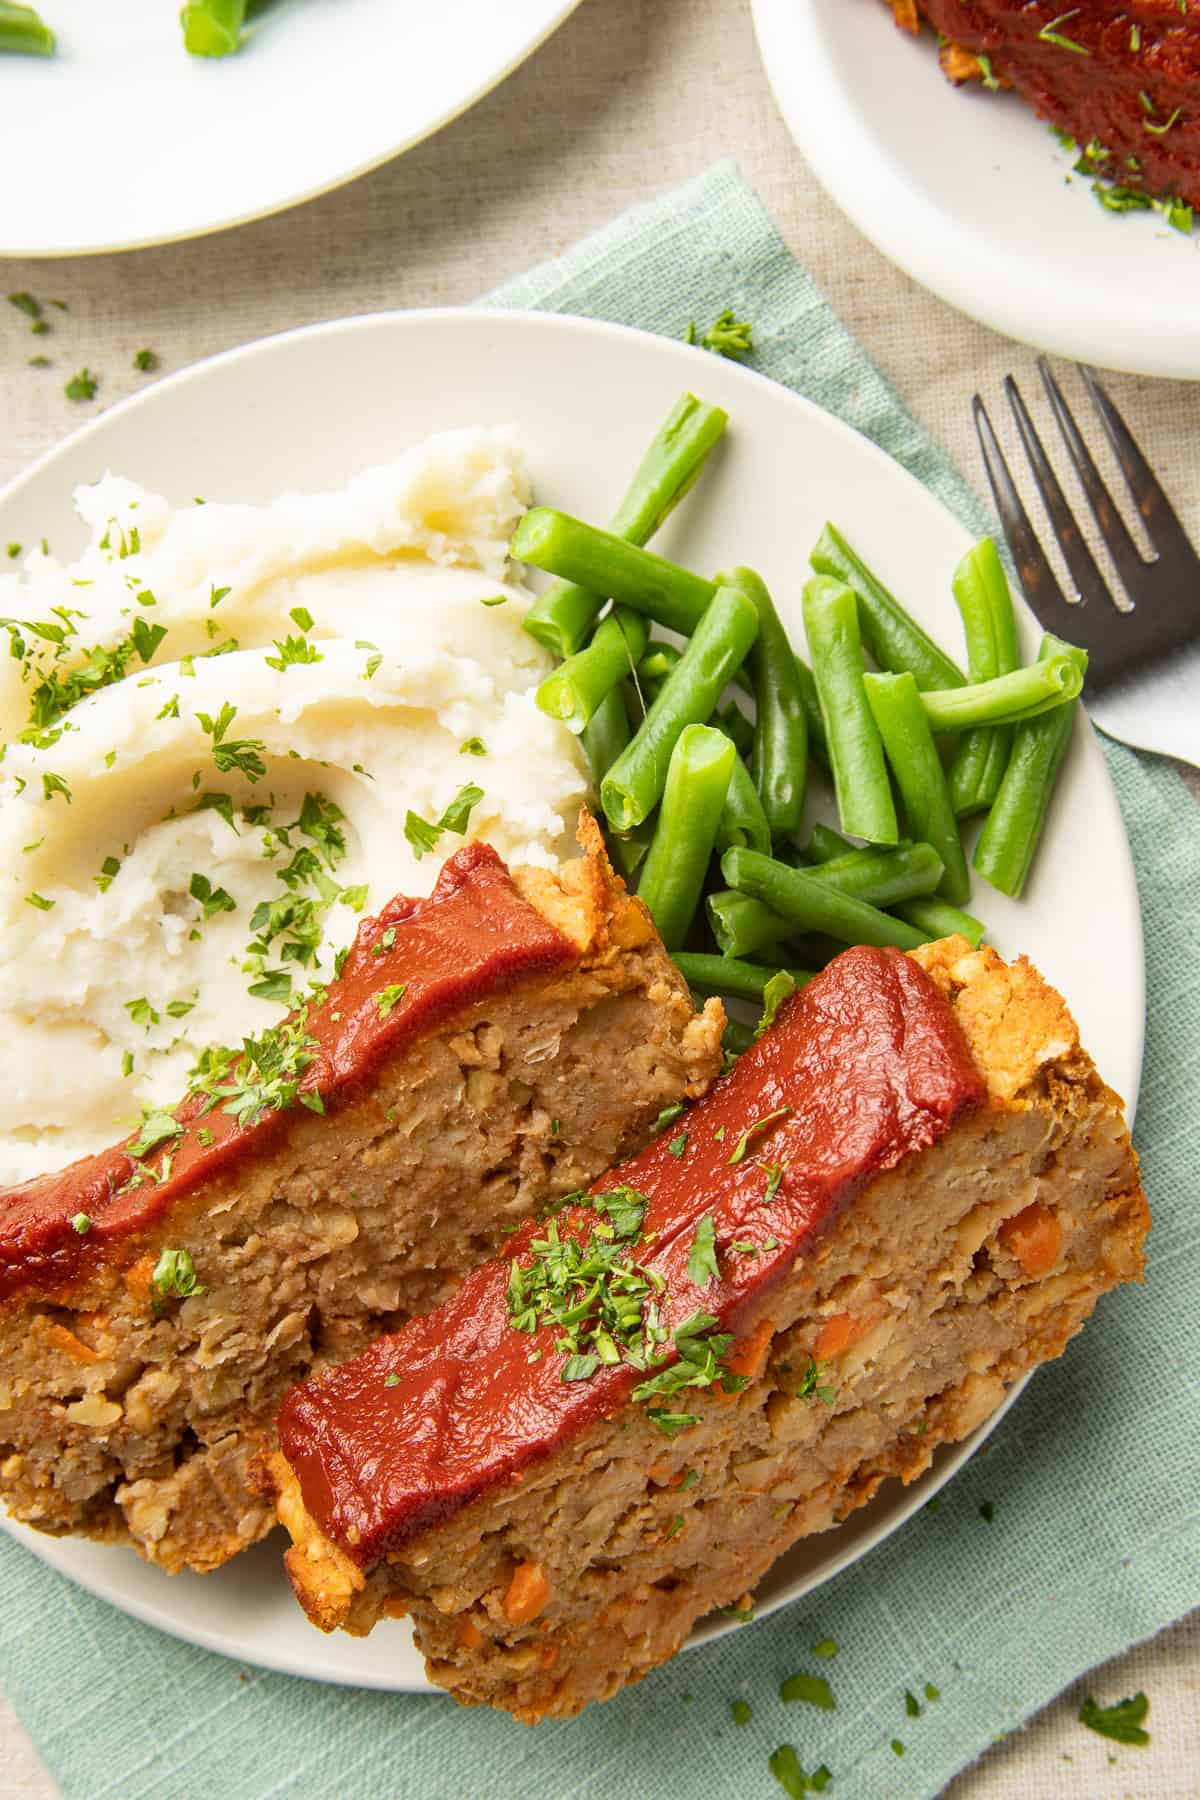 Two slices of Vegan Meatloaf on a plate with mashed potatoes and green beans.